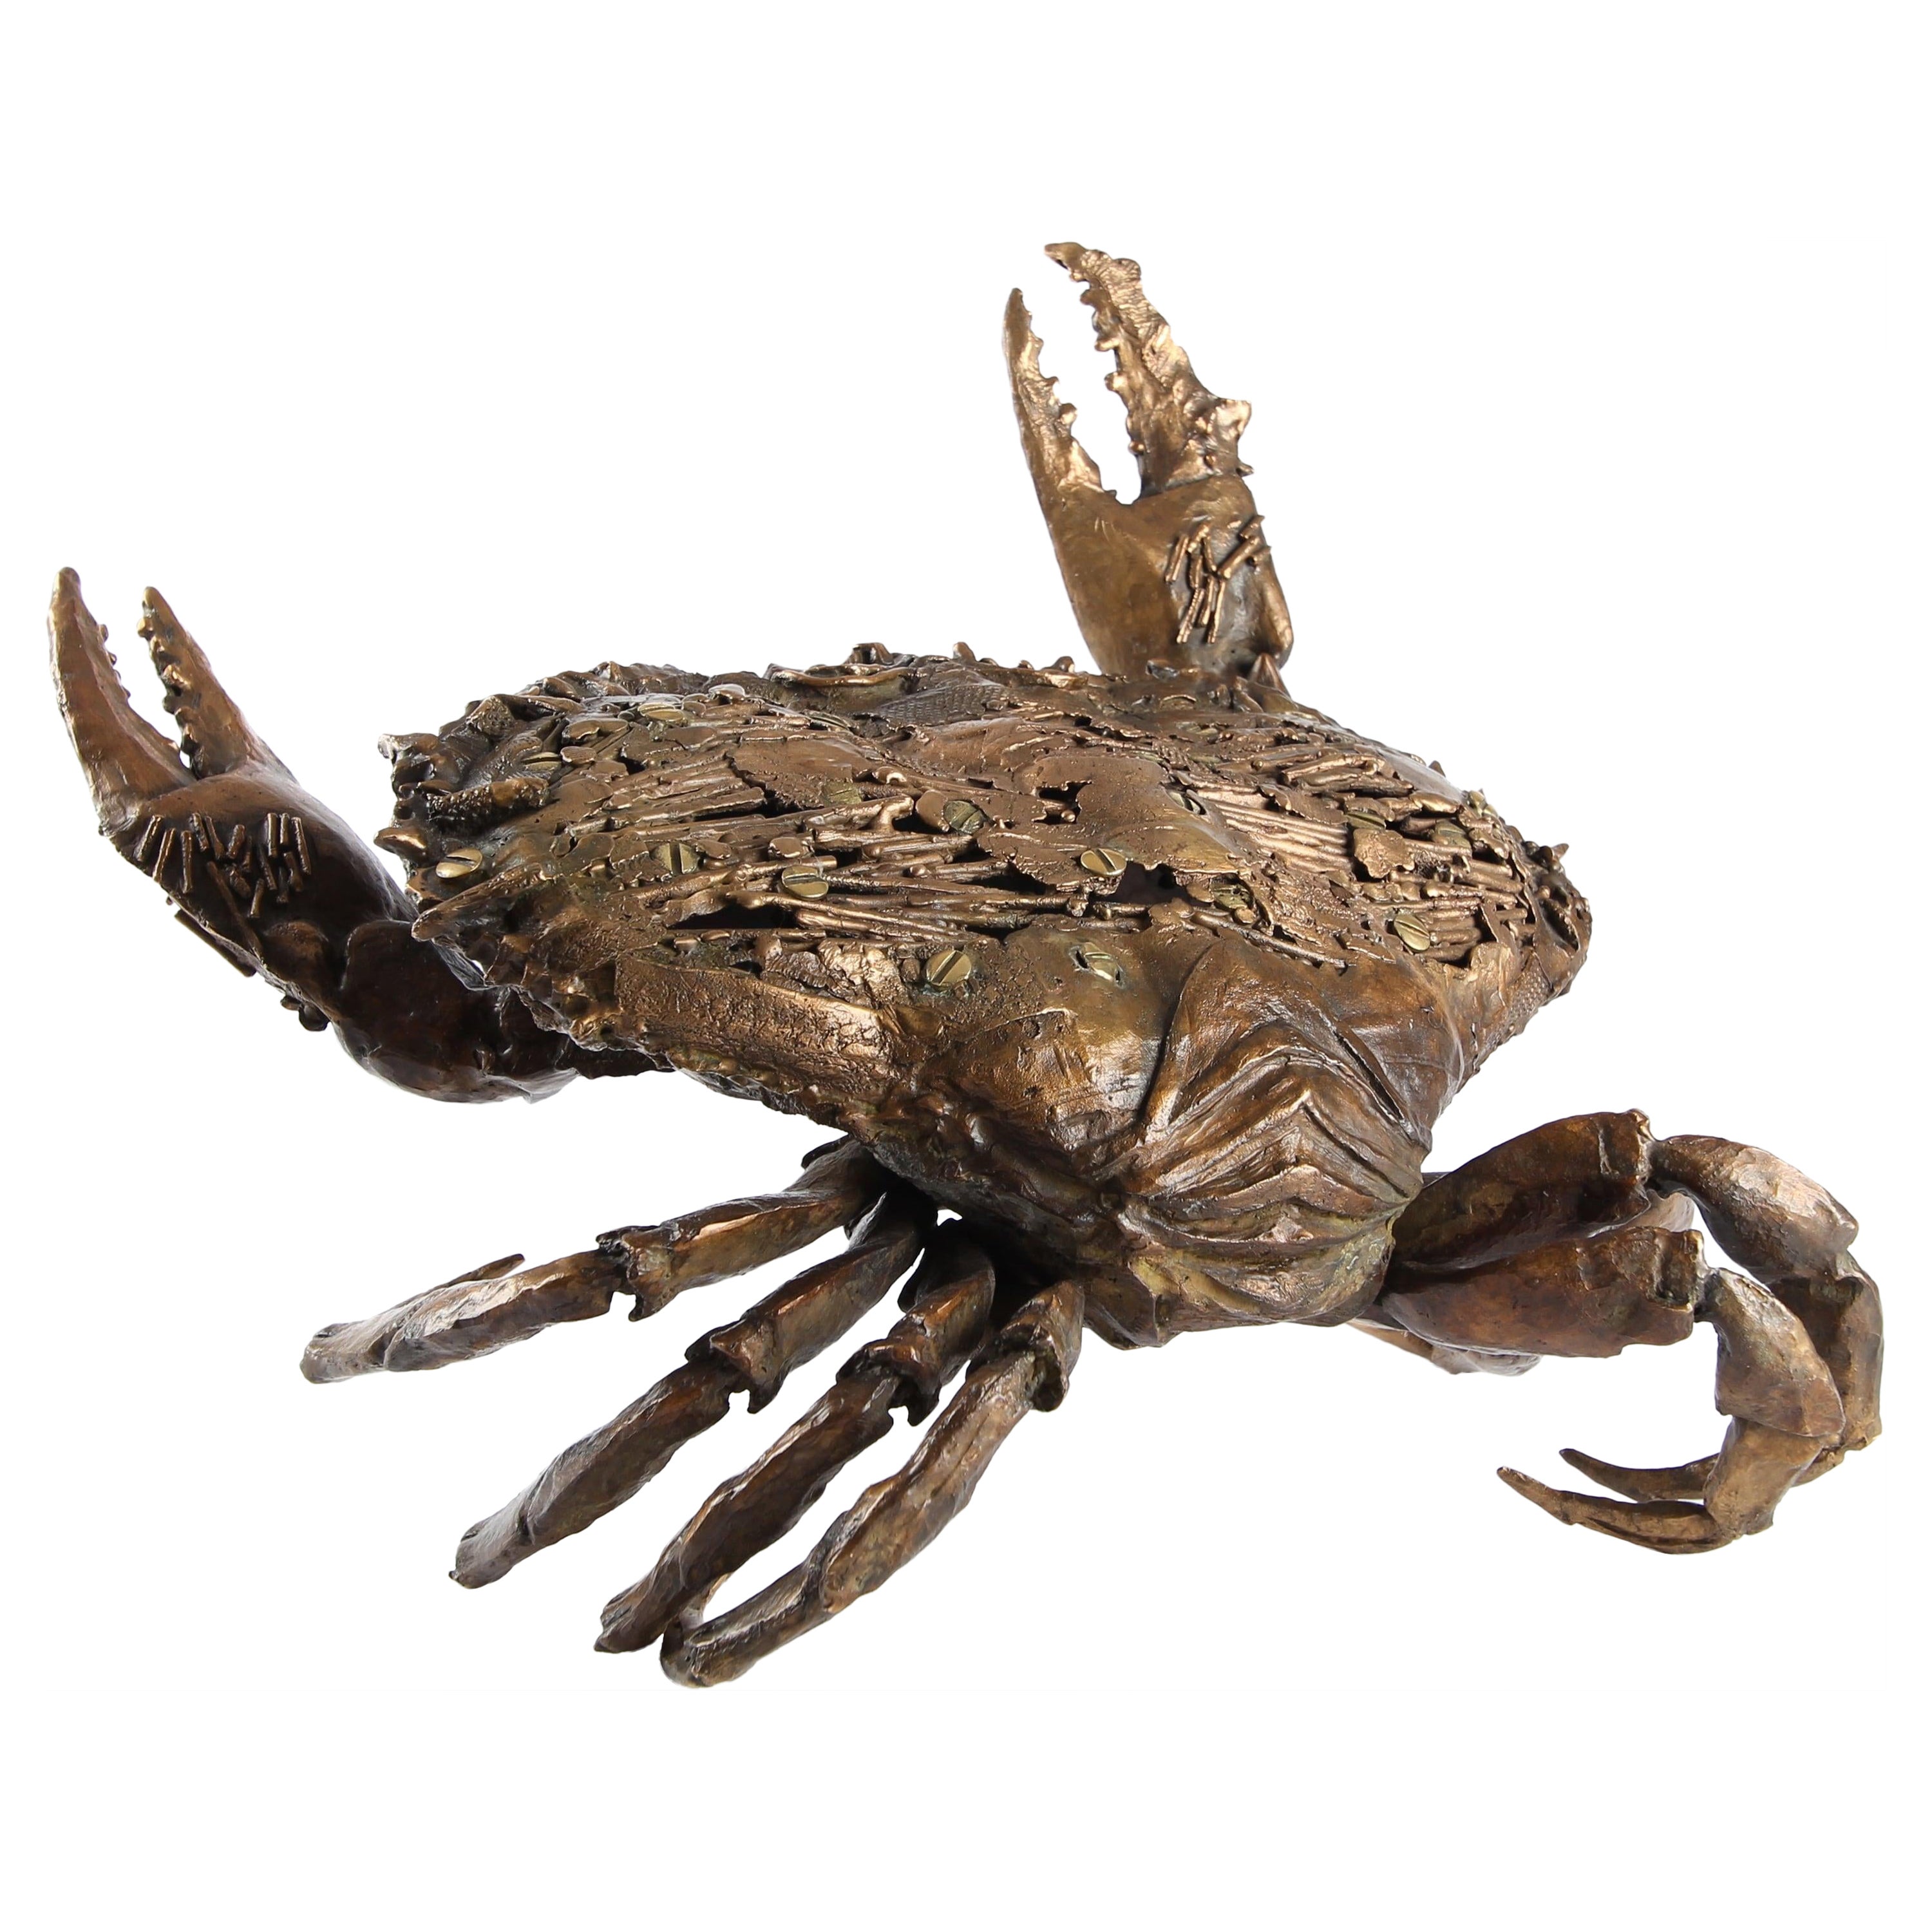 Crab Fighting is a unique bronze with brown gold patina sculpture by contemporary artist Chésade, dimensions are 38 × 30 × 31 cm (15 × 11.8 × 12.2 in). 
The sculpture is signed and comes with a metal stand and a certificate of authenticity.

The